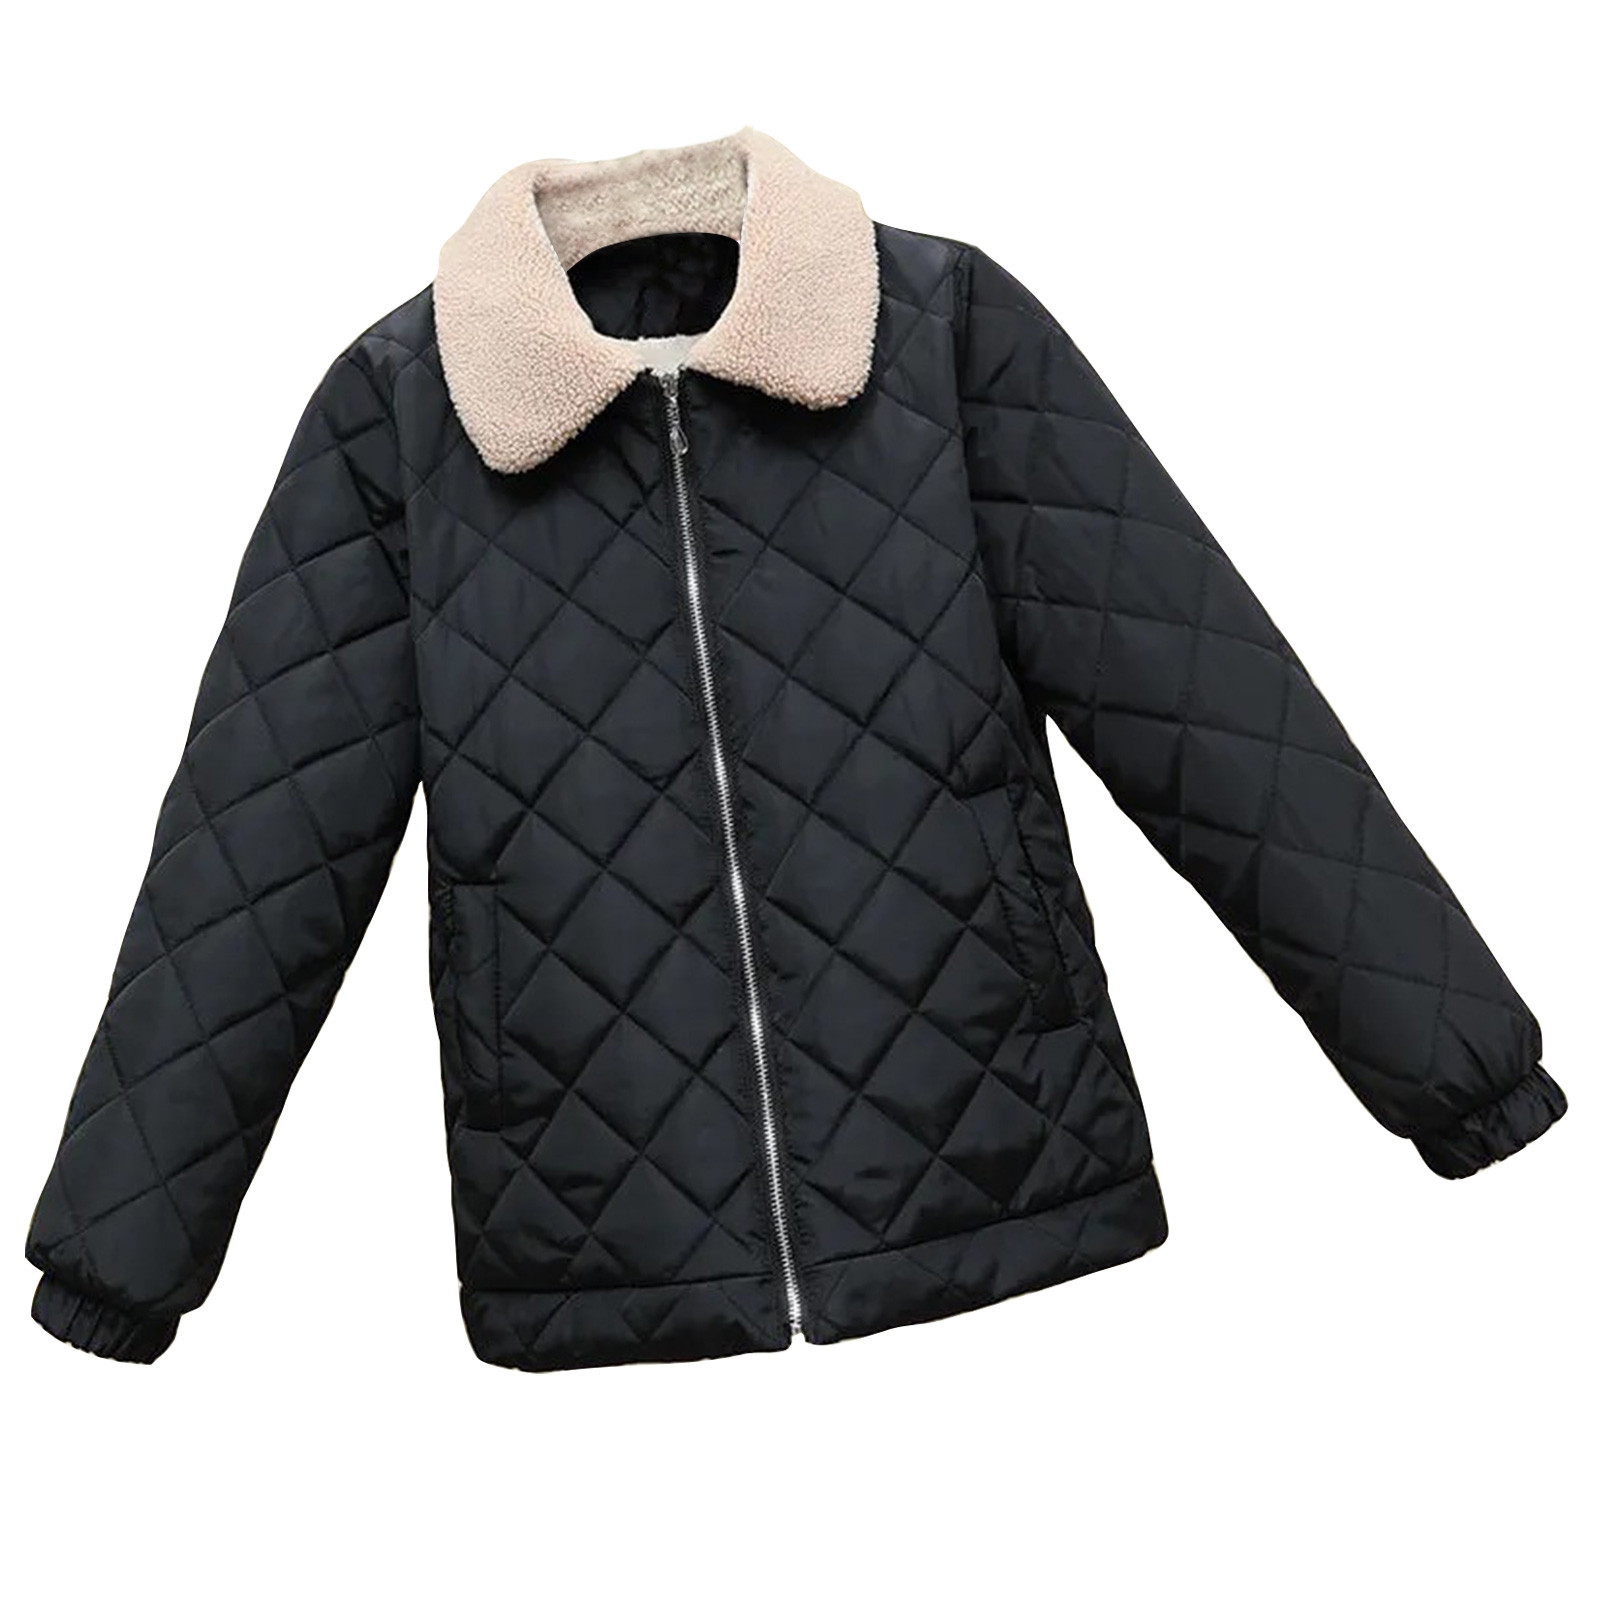 Quilted Jackets for Women, Women's Winter Warm Plus Size Solid Zip Up ...